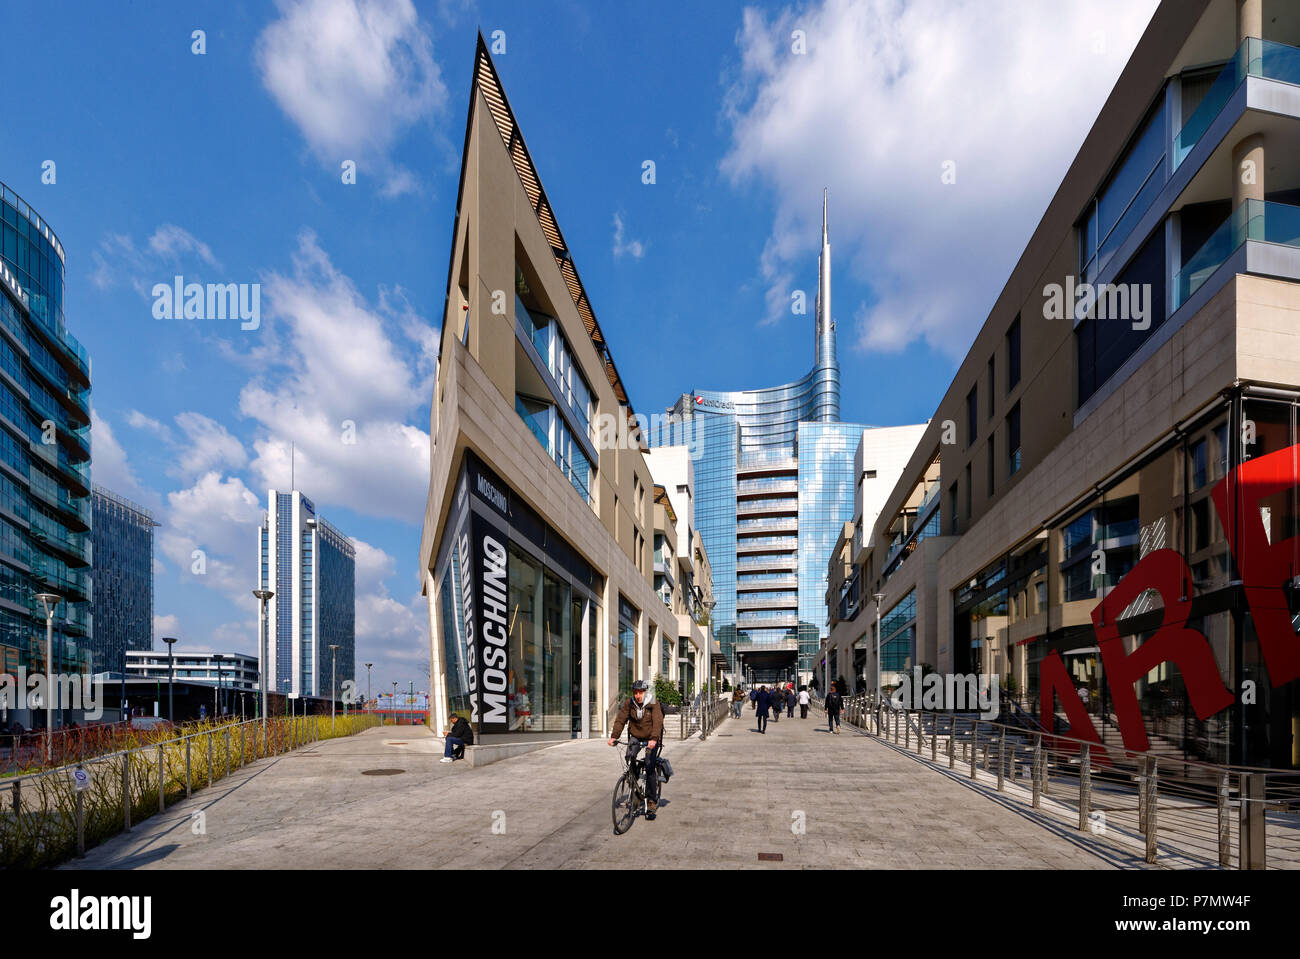 Italy, Lombardy, Milan, Porta Nuova Garibaldi district, the new business district built between 2009 and 2015 with the Unicredit Tower designed by architect Cesar Pelli Stock Photo